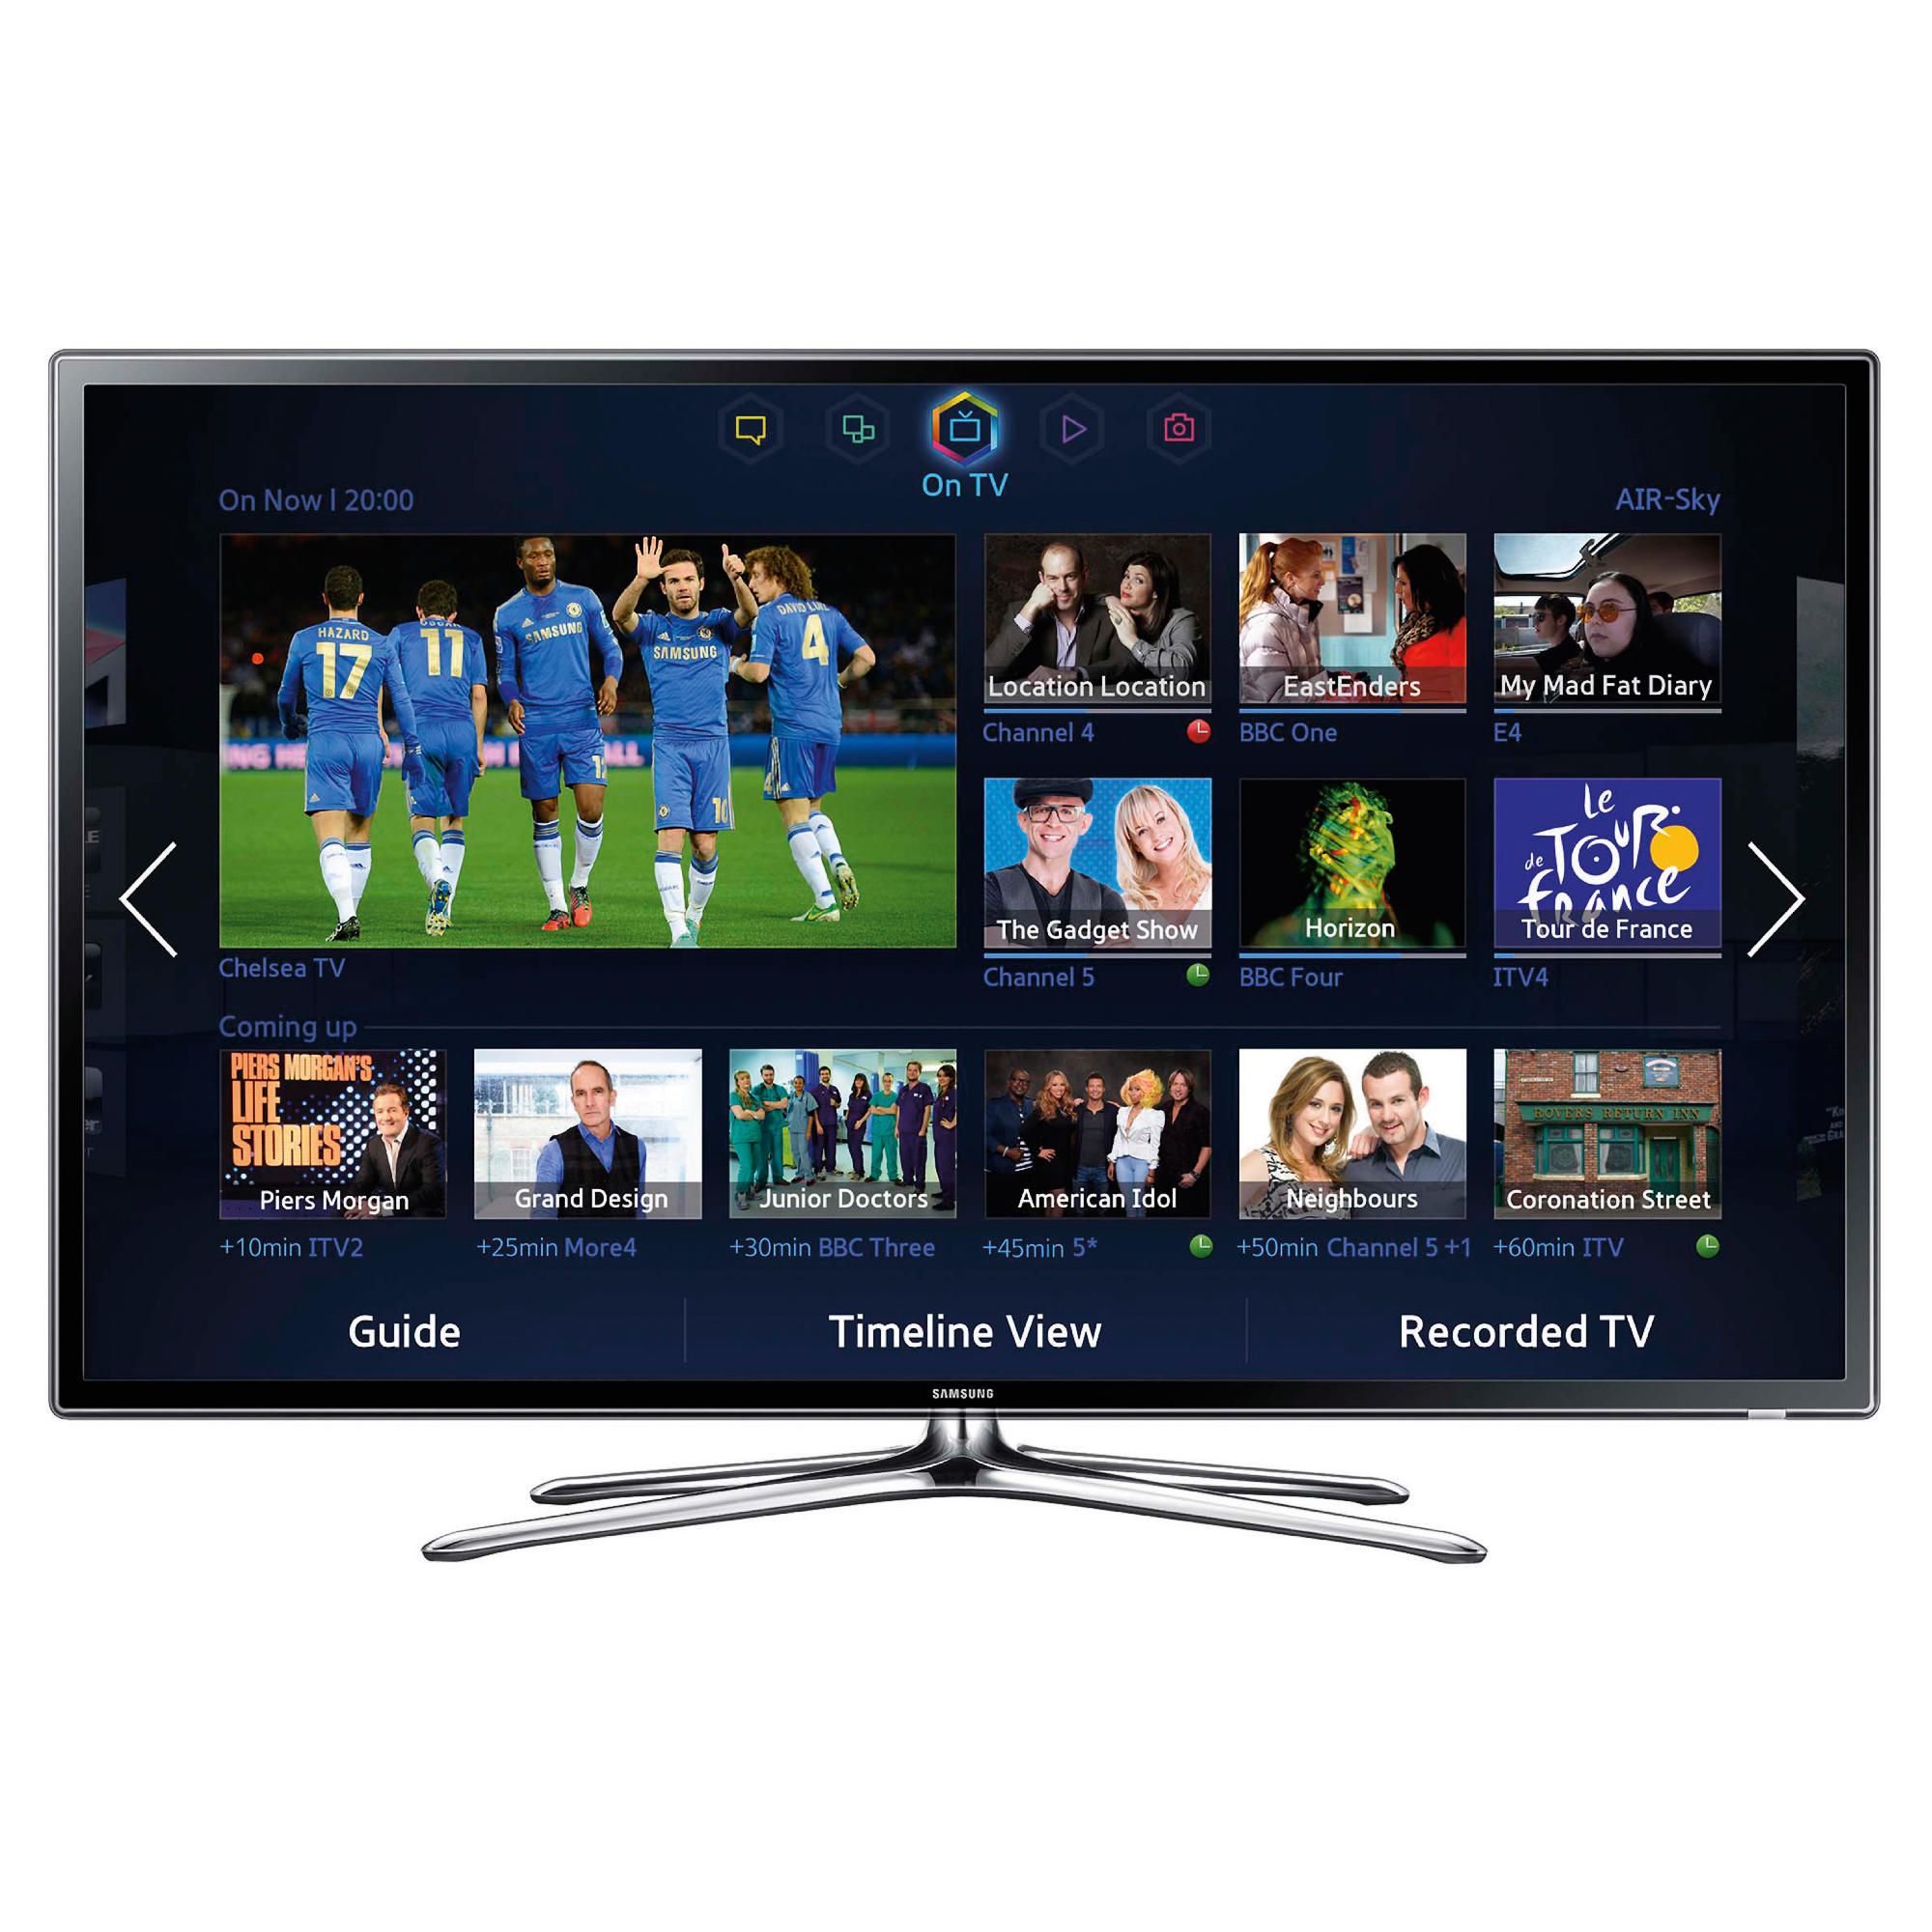 Samsung UE46F6320 46inch Full HD 1080p 3D Slim LED Smart TV with Freeview HD